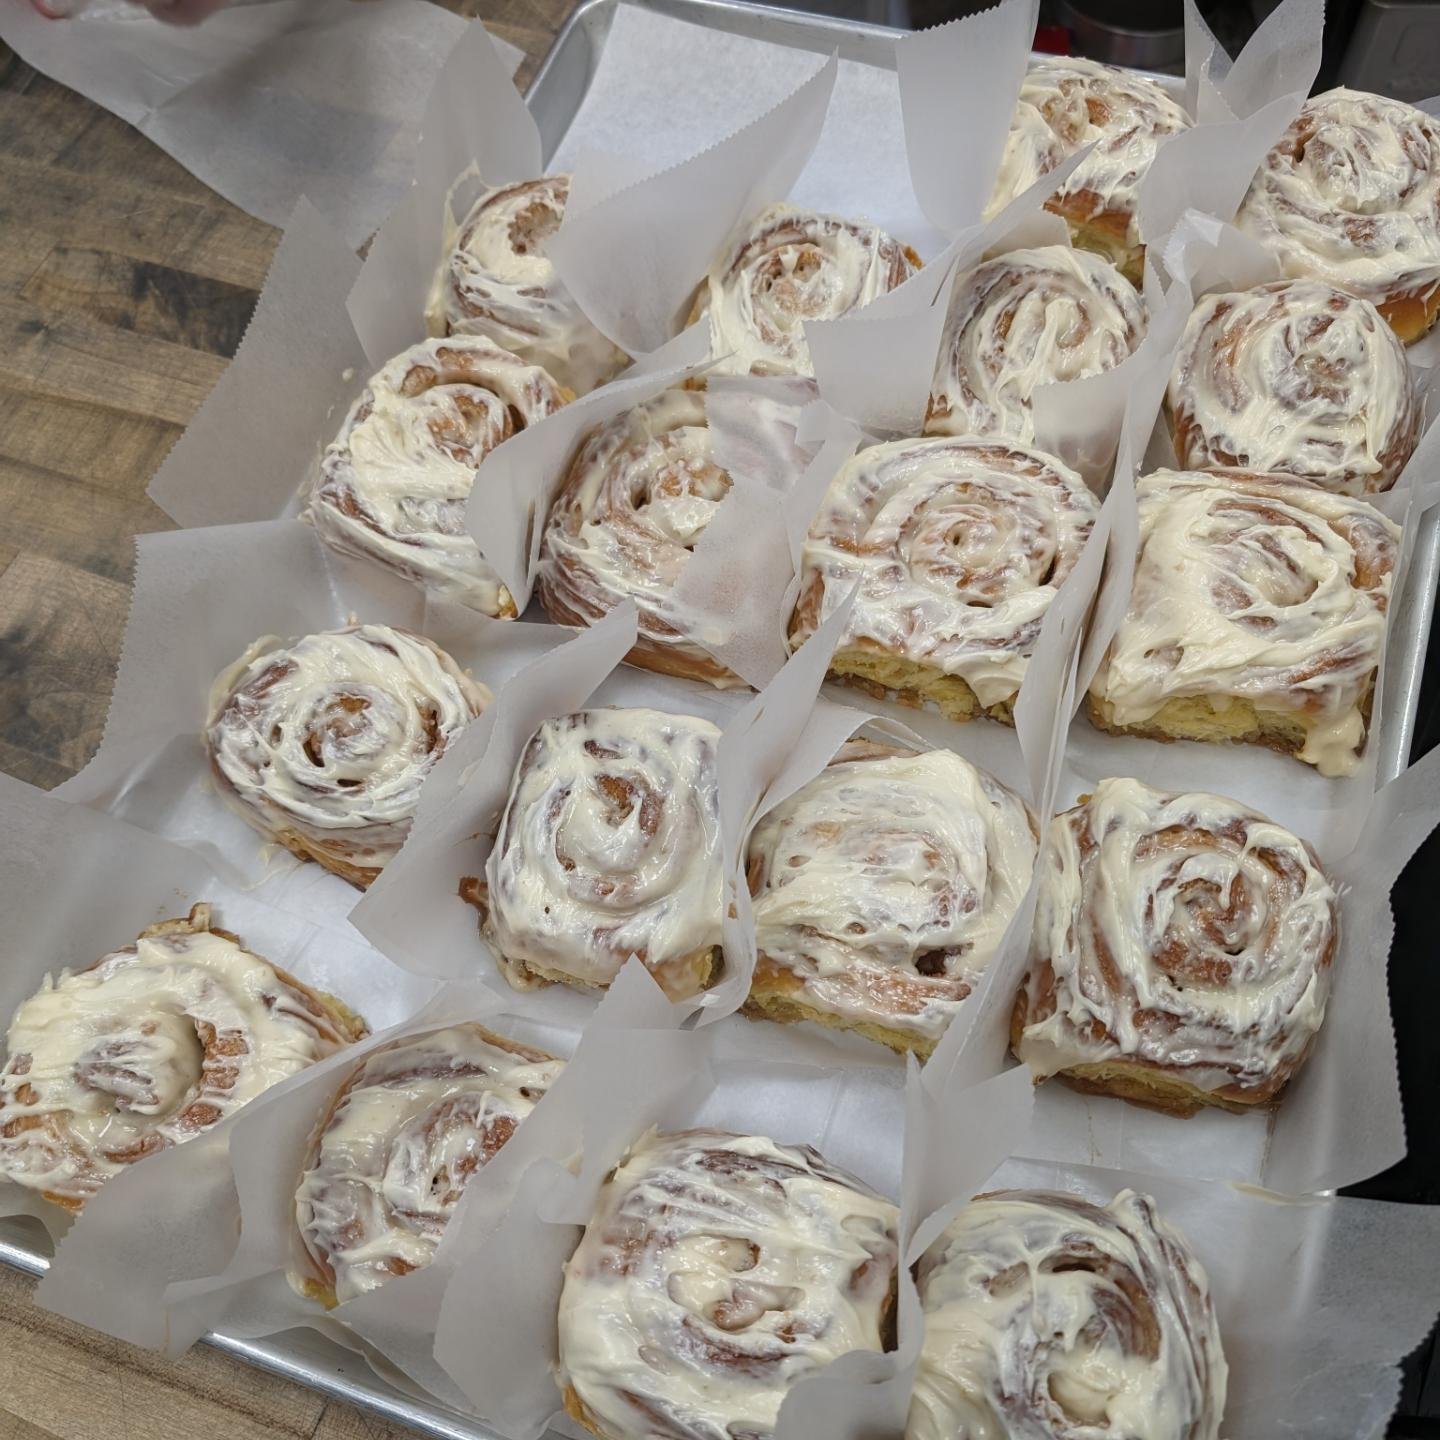 PICK YOUR PASSION.
Cinnamon Rolls with cream cheese frosting
or...
a beefed up pup cup for your fur-baby. 🐾

Come join us for pup cup Palooza, we've got some hig end pup cups, all pup cups sales go to @lakehumanesociety ! And it's the last day for a